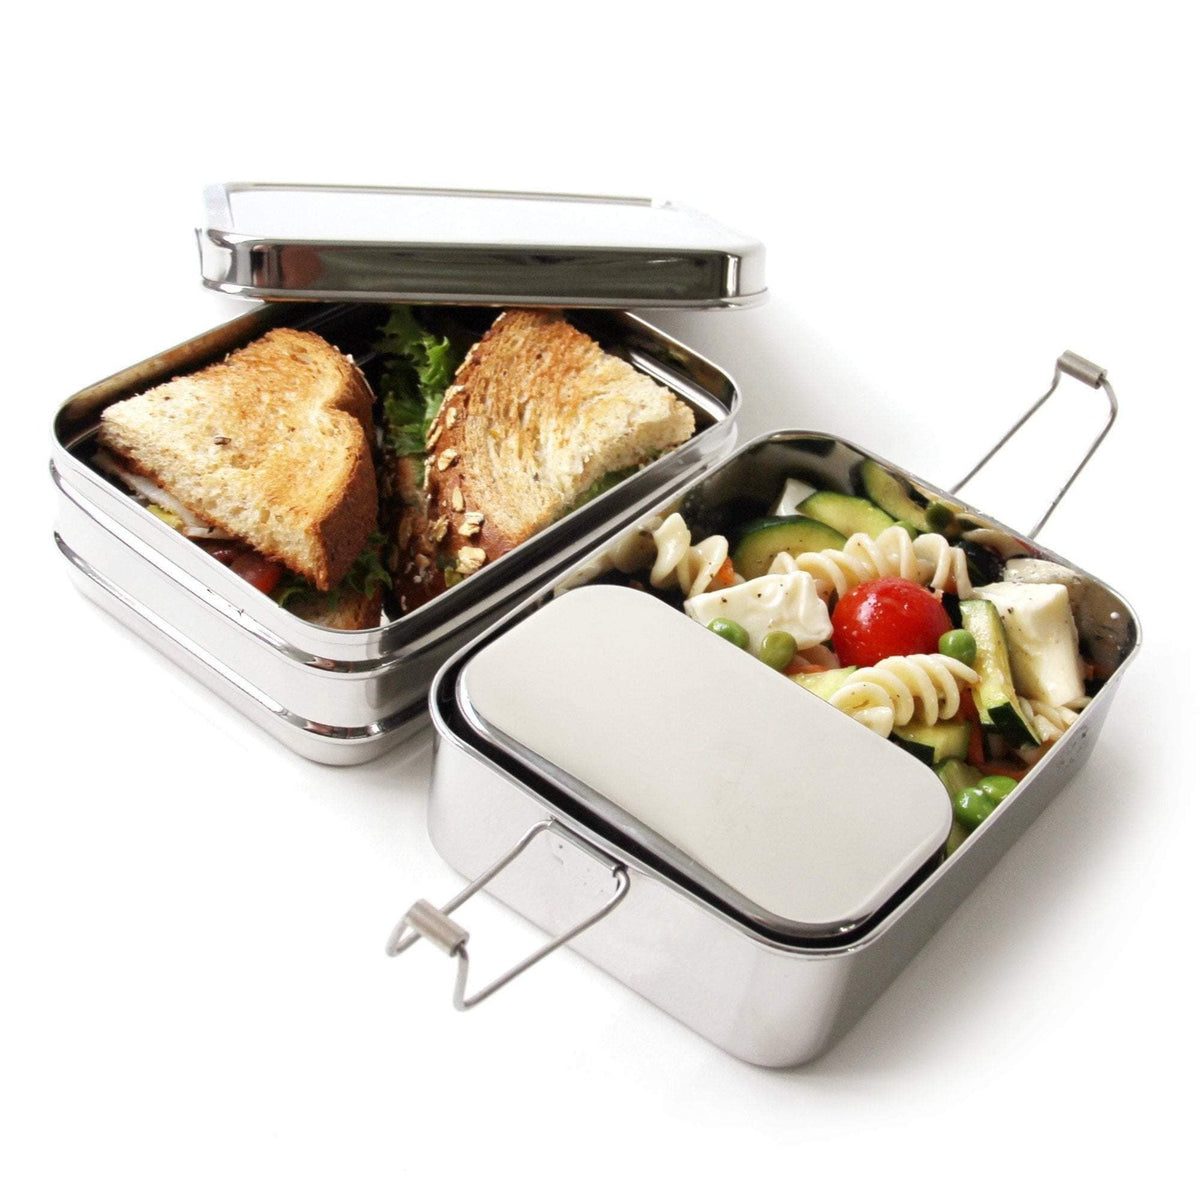 Stainless Steel Lunch Box, 3 Tier Leak Proof, 3 Compartments, 75 oz